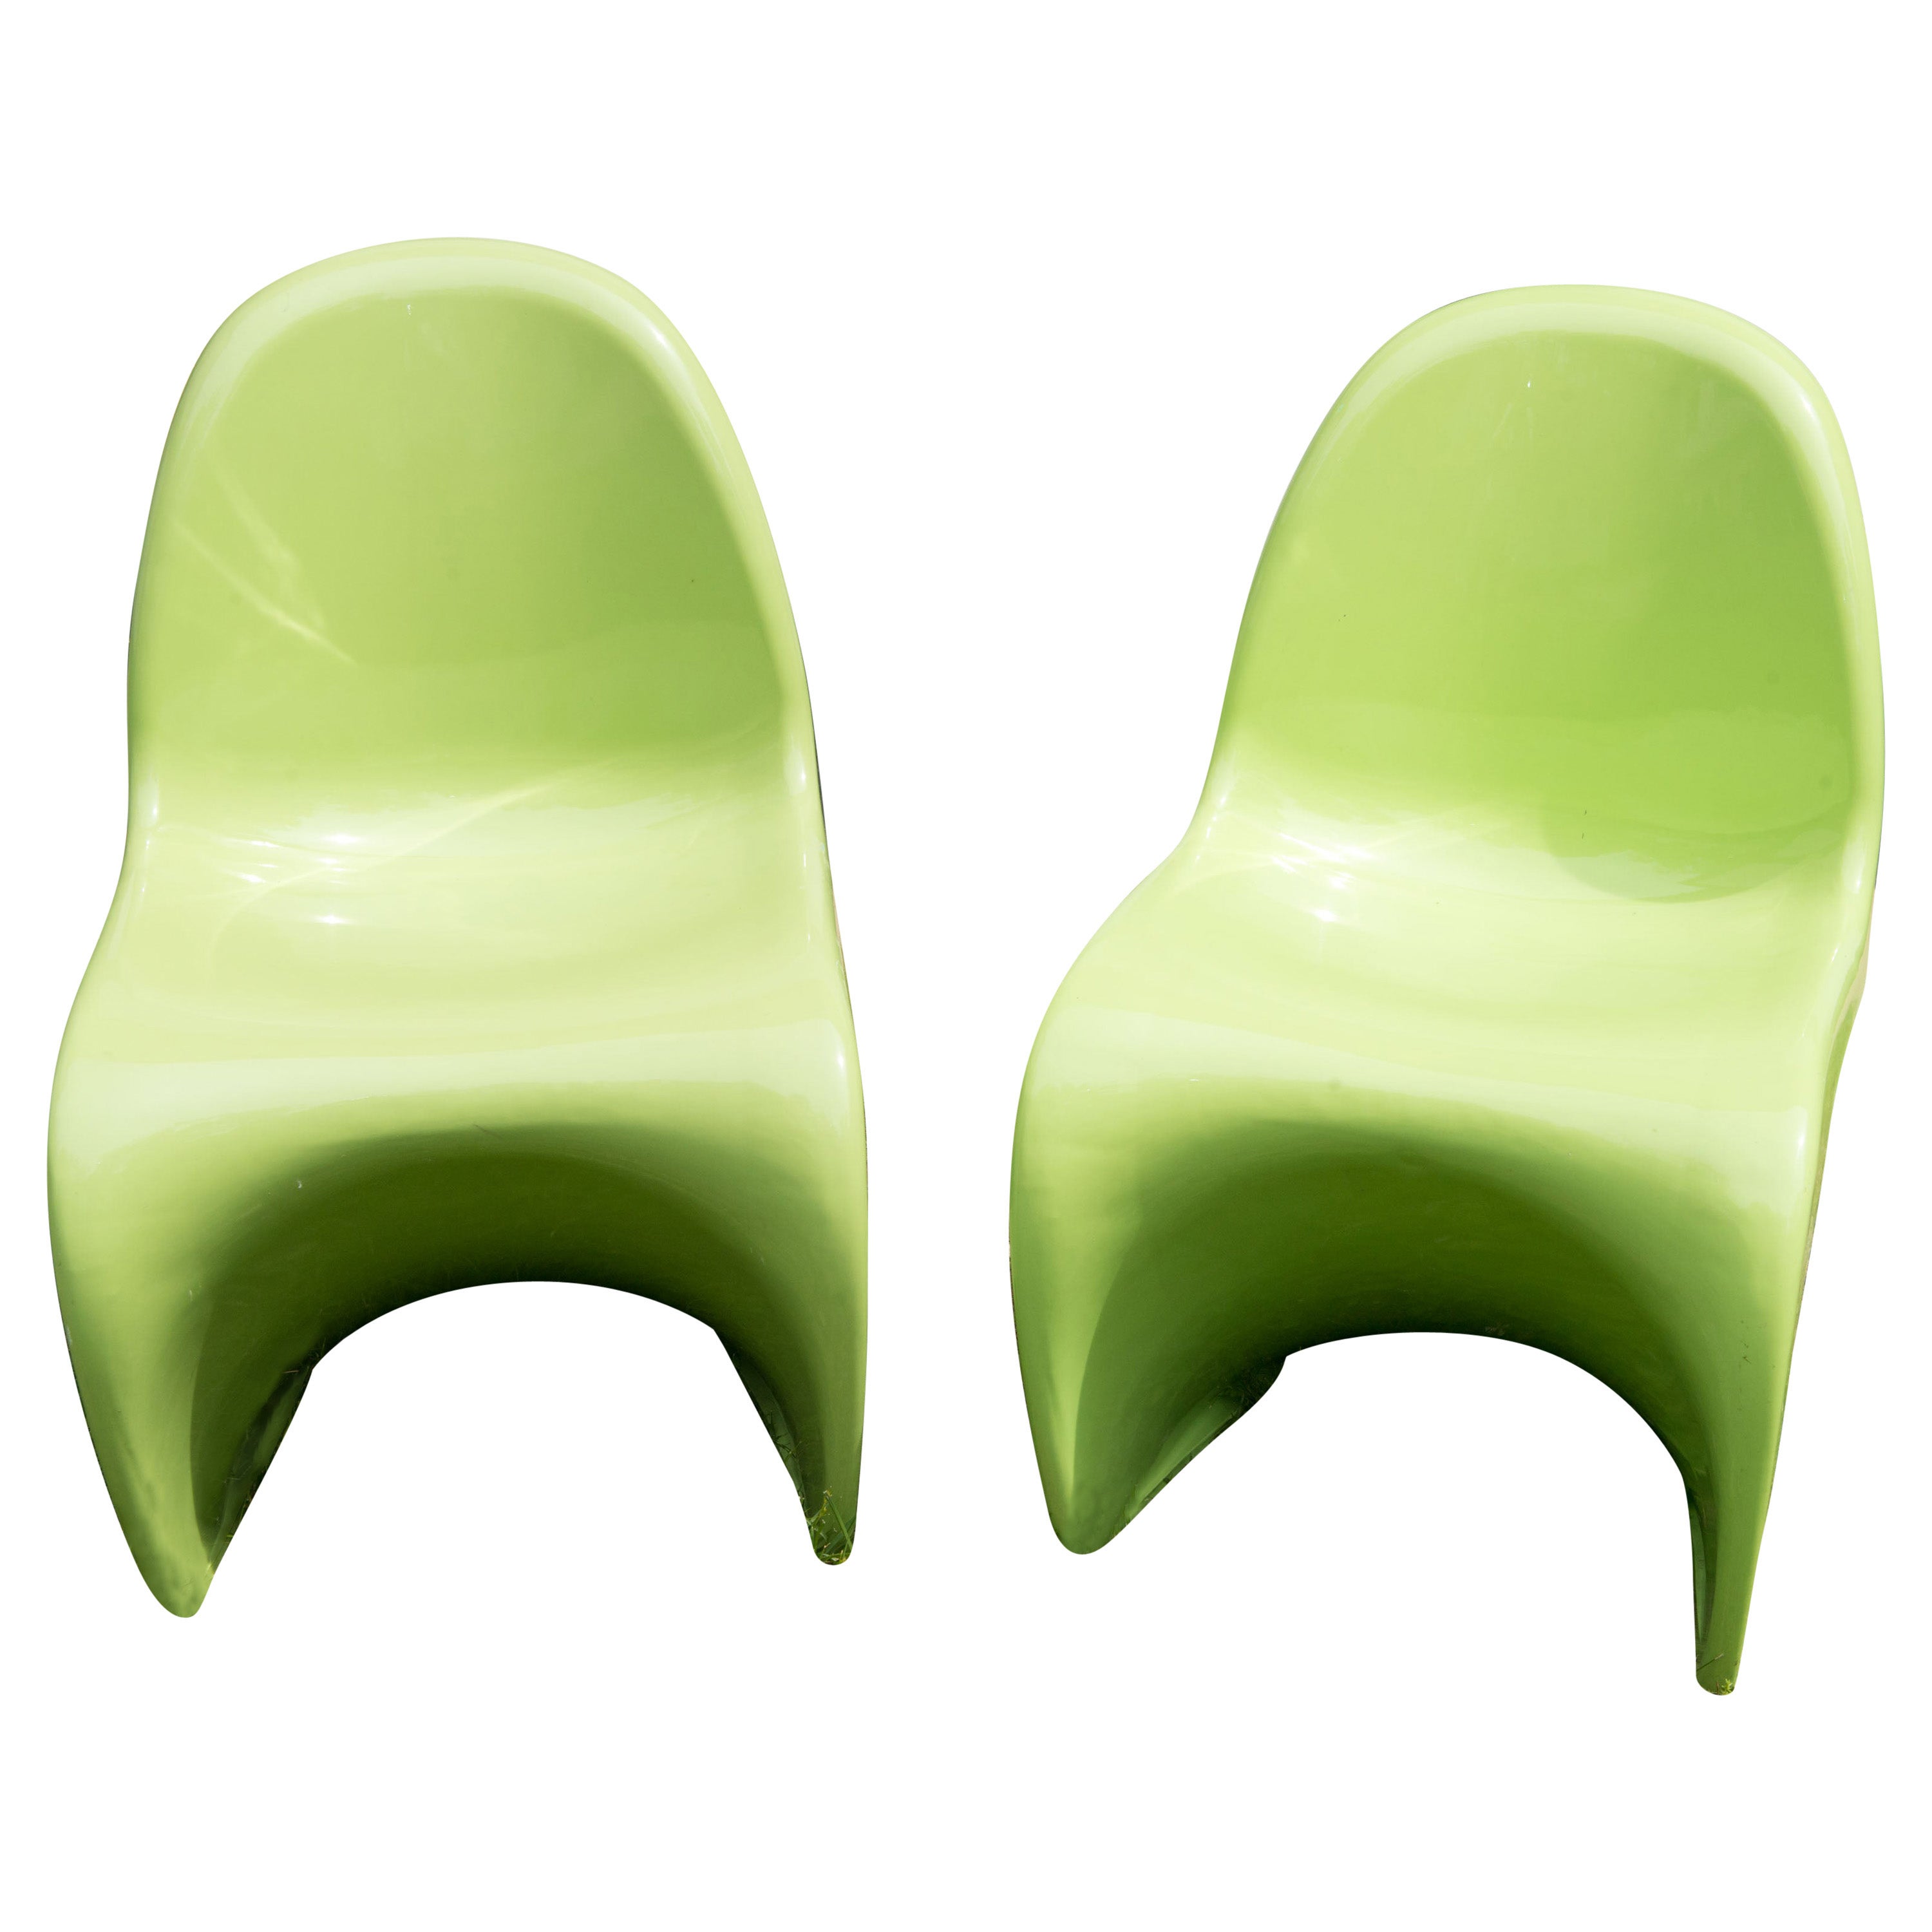 Pair of Panton Classic Chairs in Lime Green